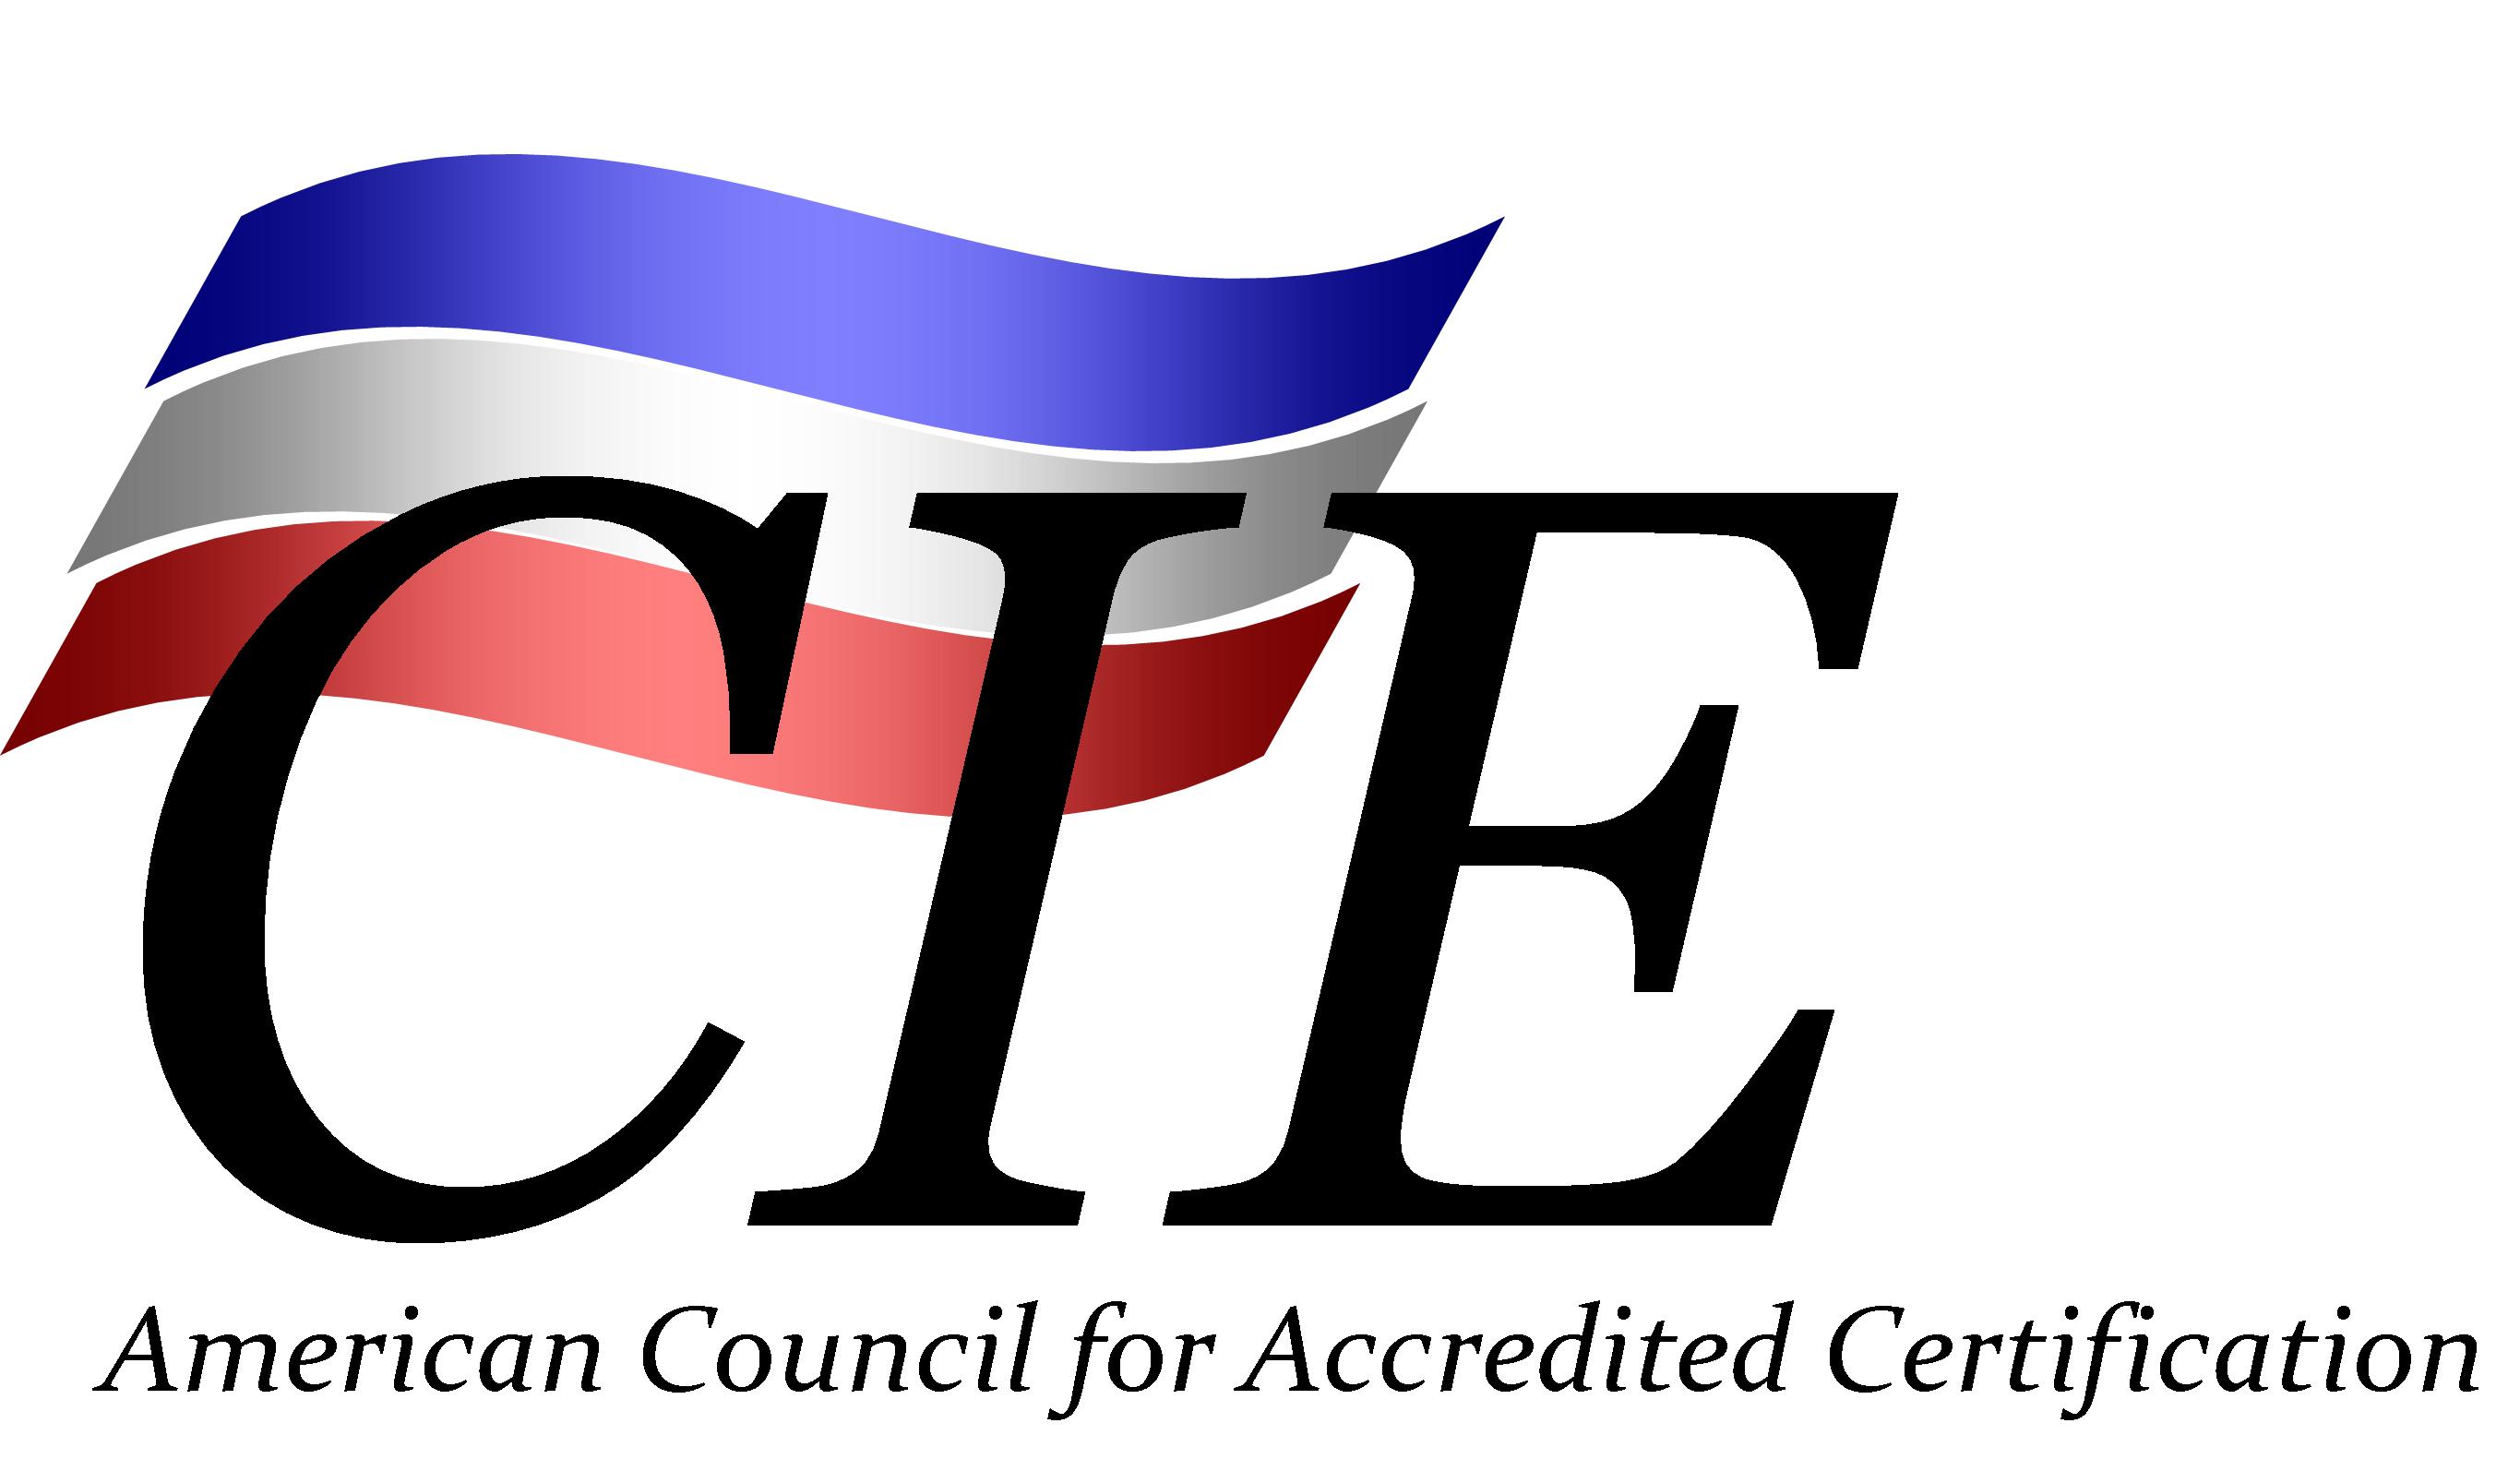 MyHealthyHome® LLC has completed CIE (Indoor Environmental) certification from the American Council for Accredited Certification (ACAC)